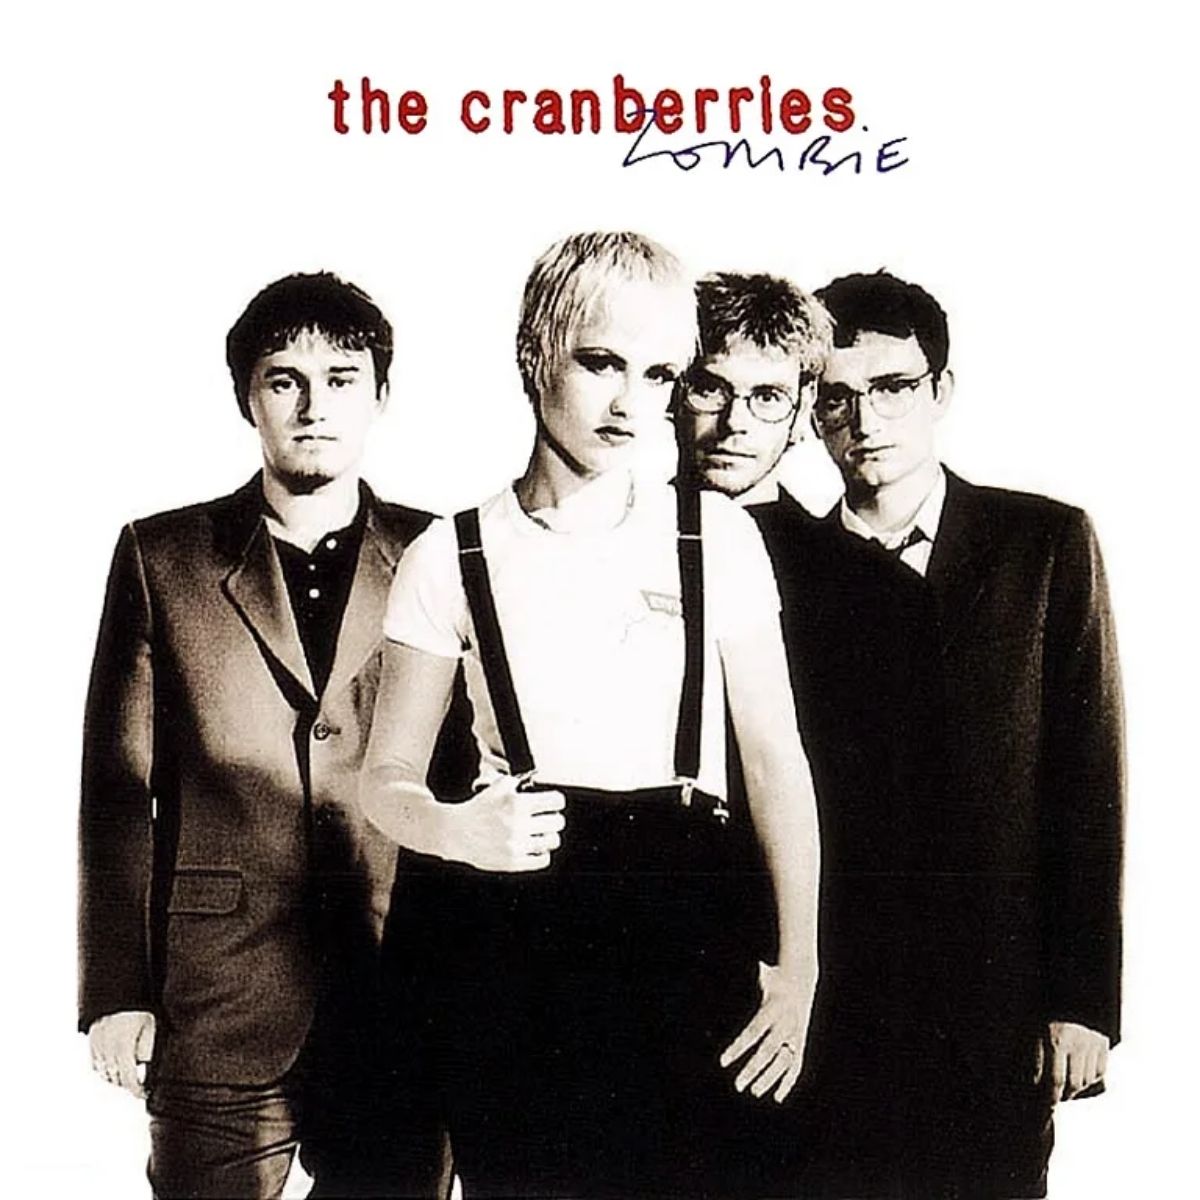 One of the covers of the single "Zombie" by The Cranberries